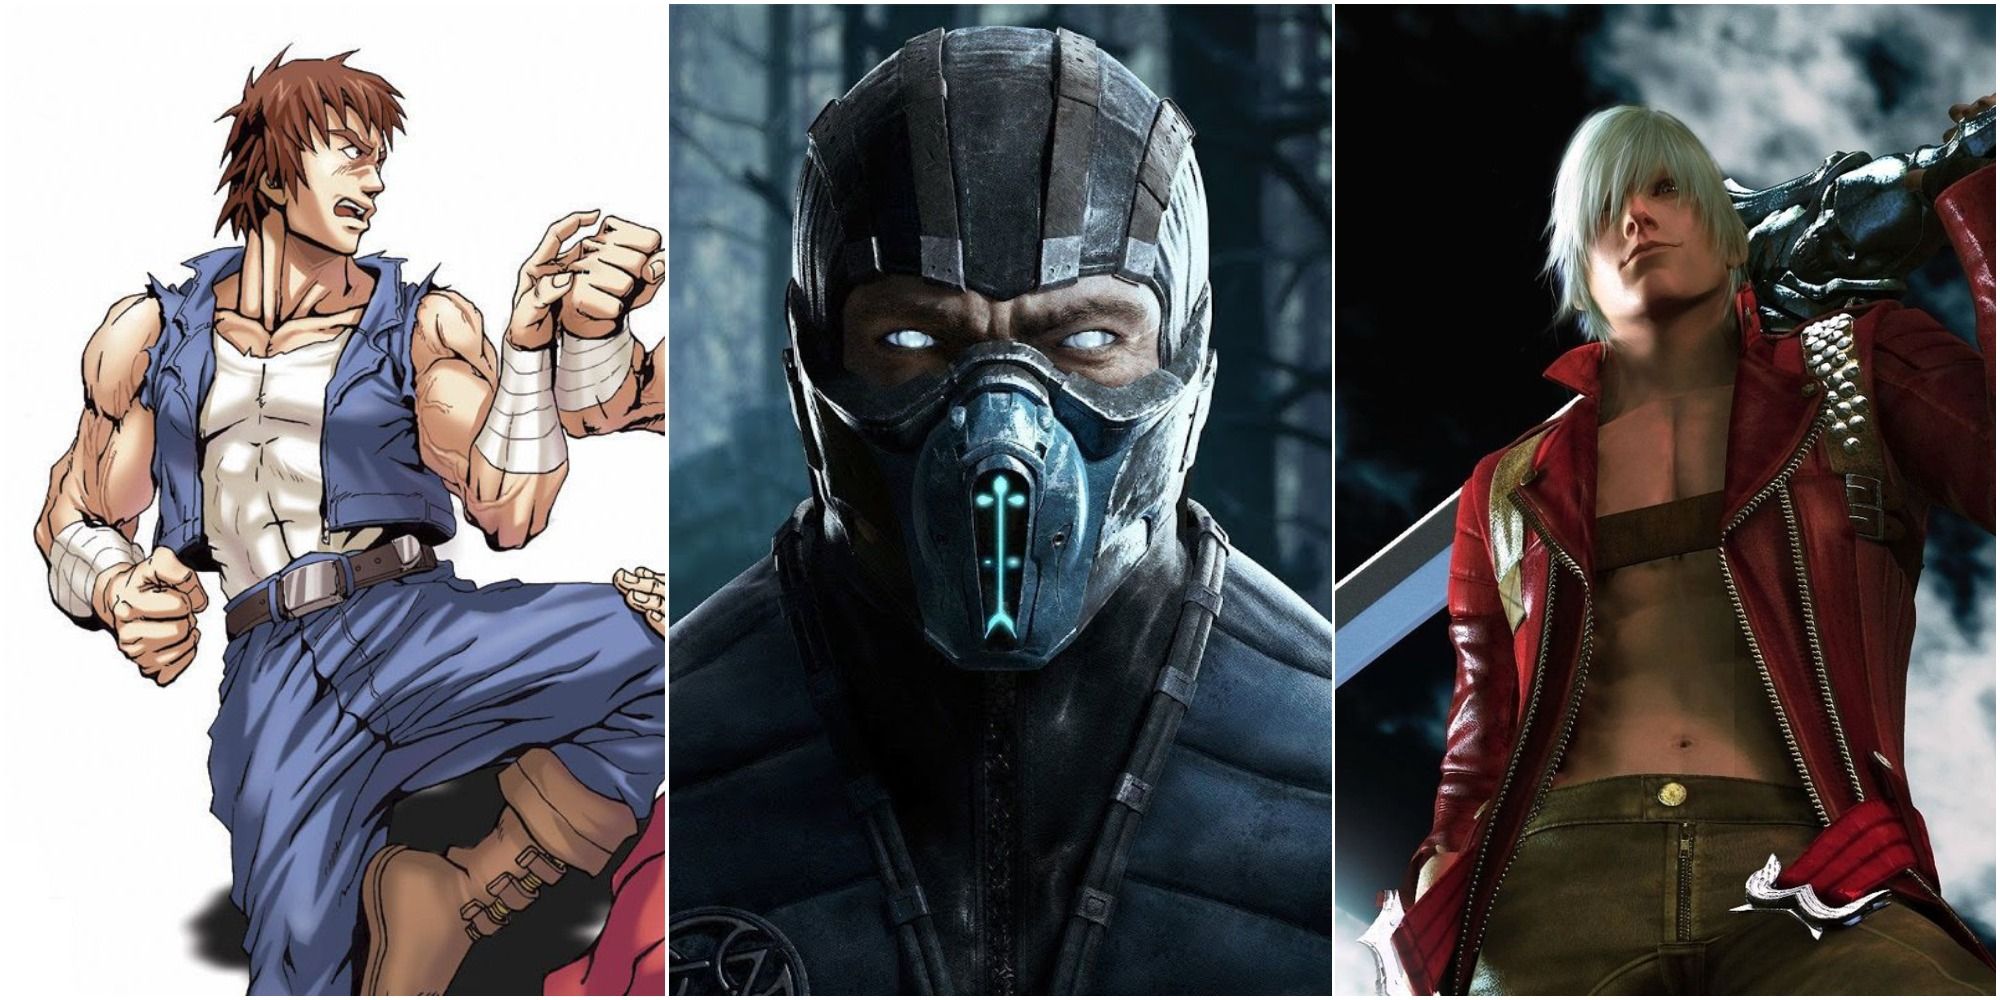 Little Brothers In Games Featured - Lee Brothers, Sub Zero, Dante